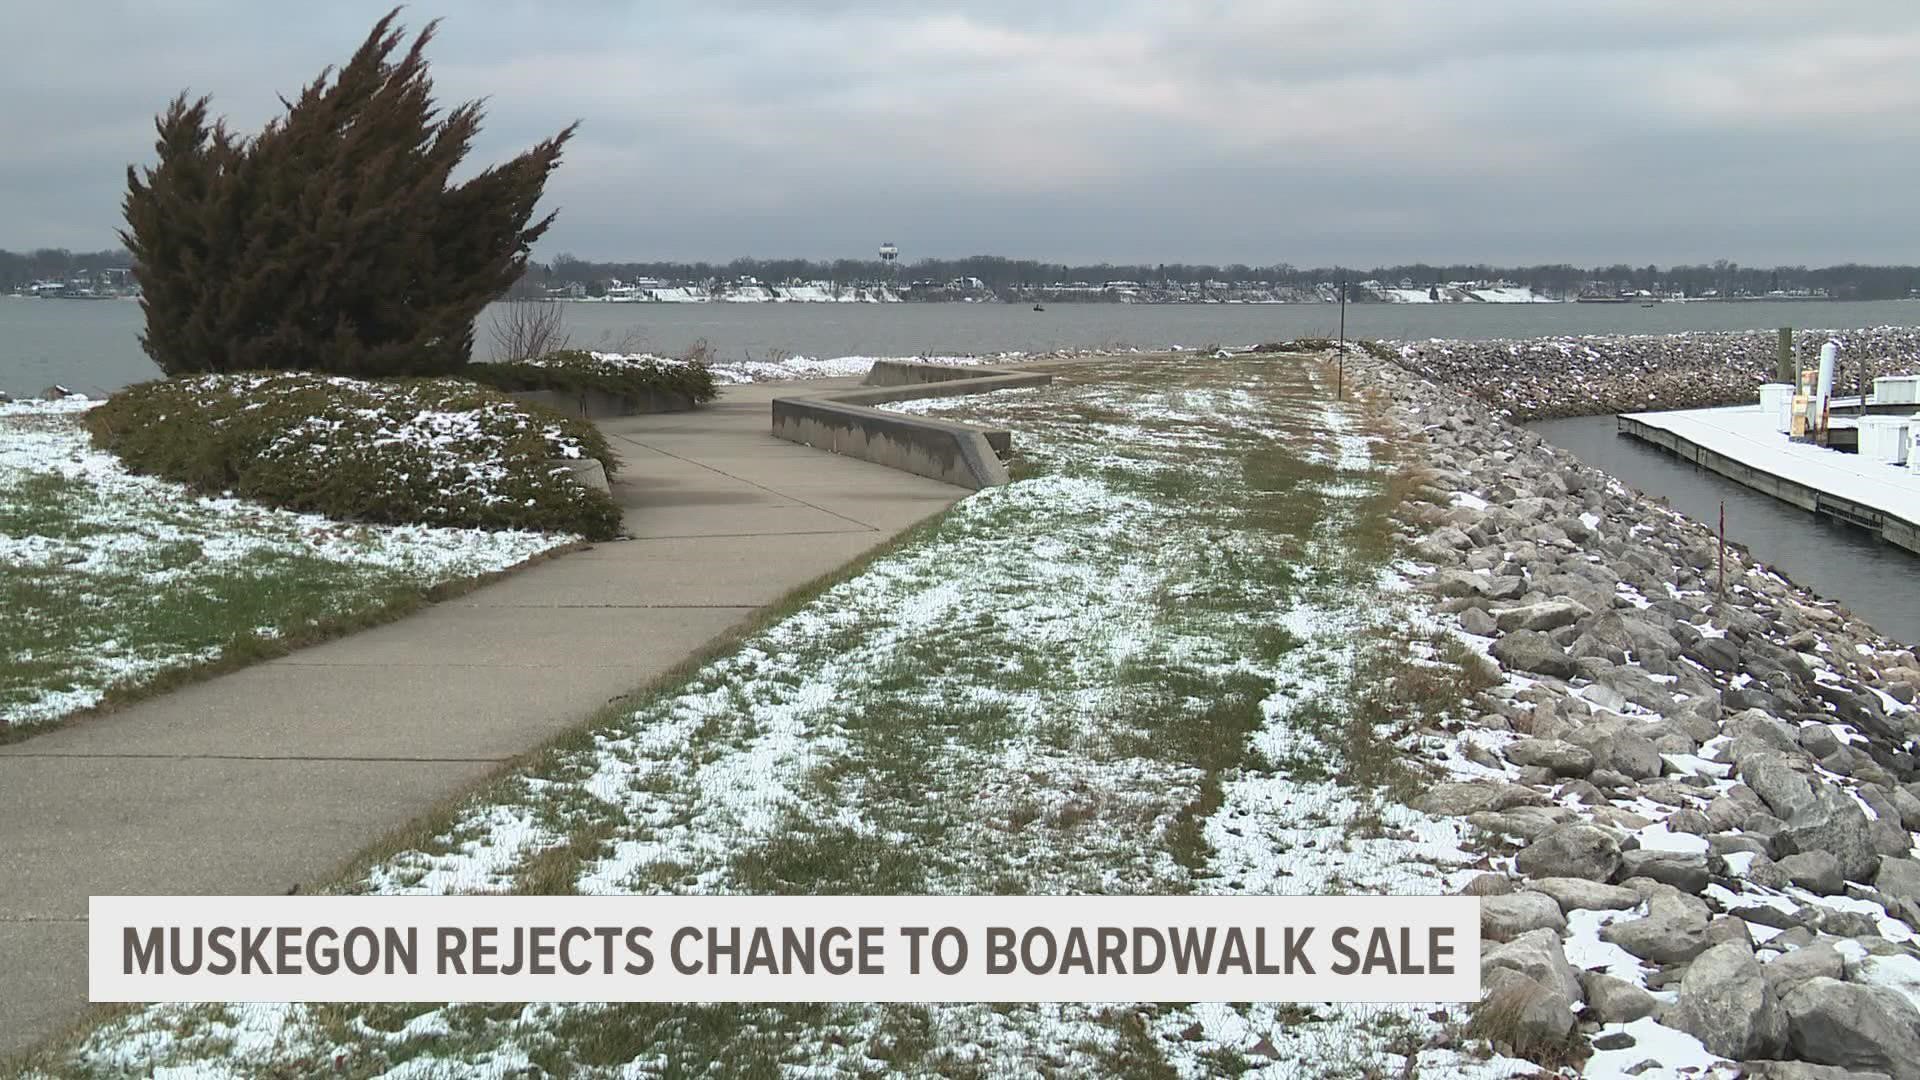 All the commissioners talked about wanting to preserve public access to Muskegon Lake via the boardwalk, but thought the agreement didn't do enough to cement it.